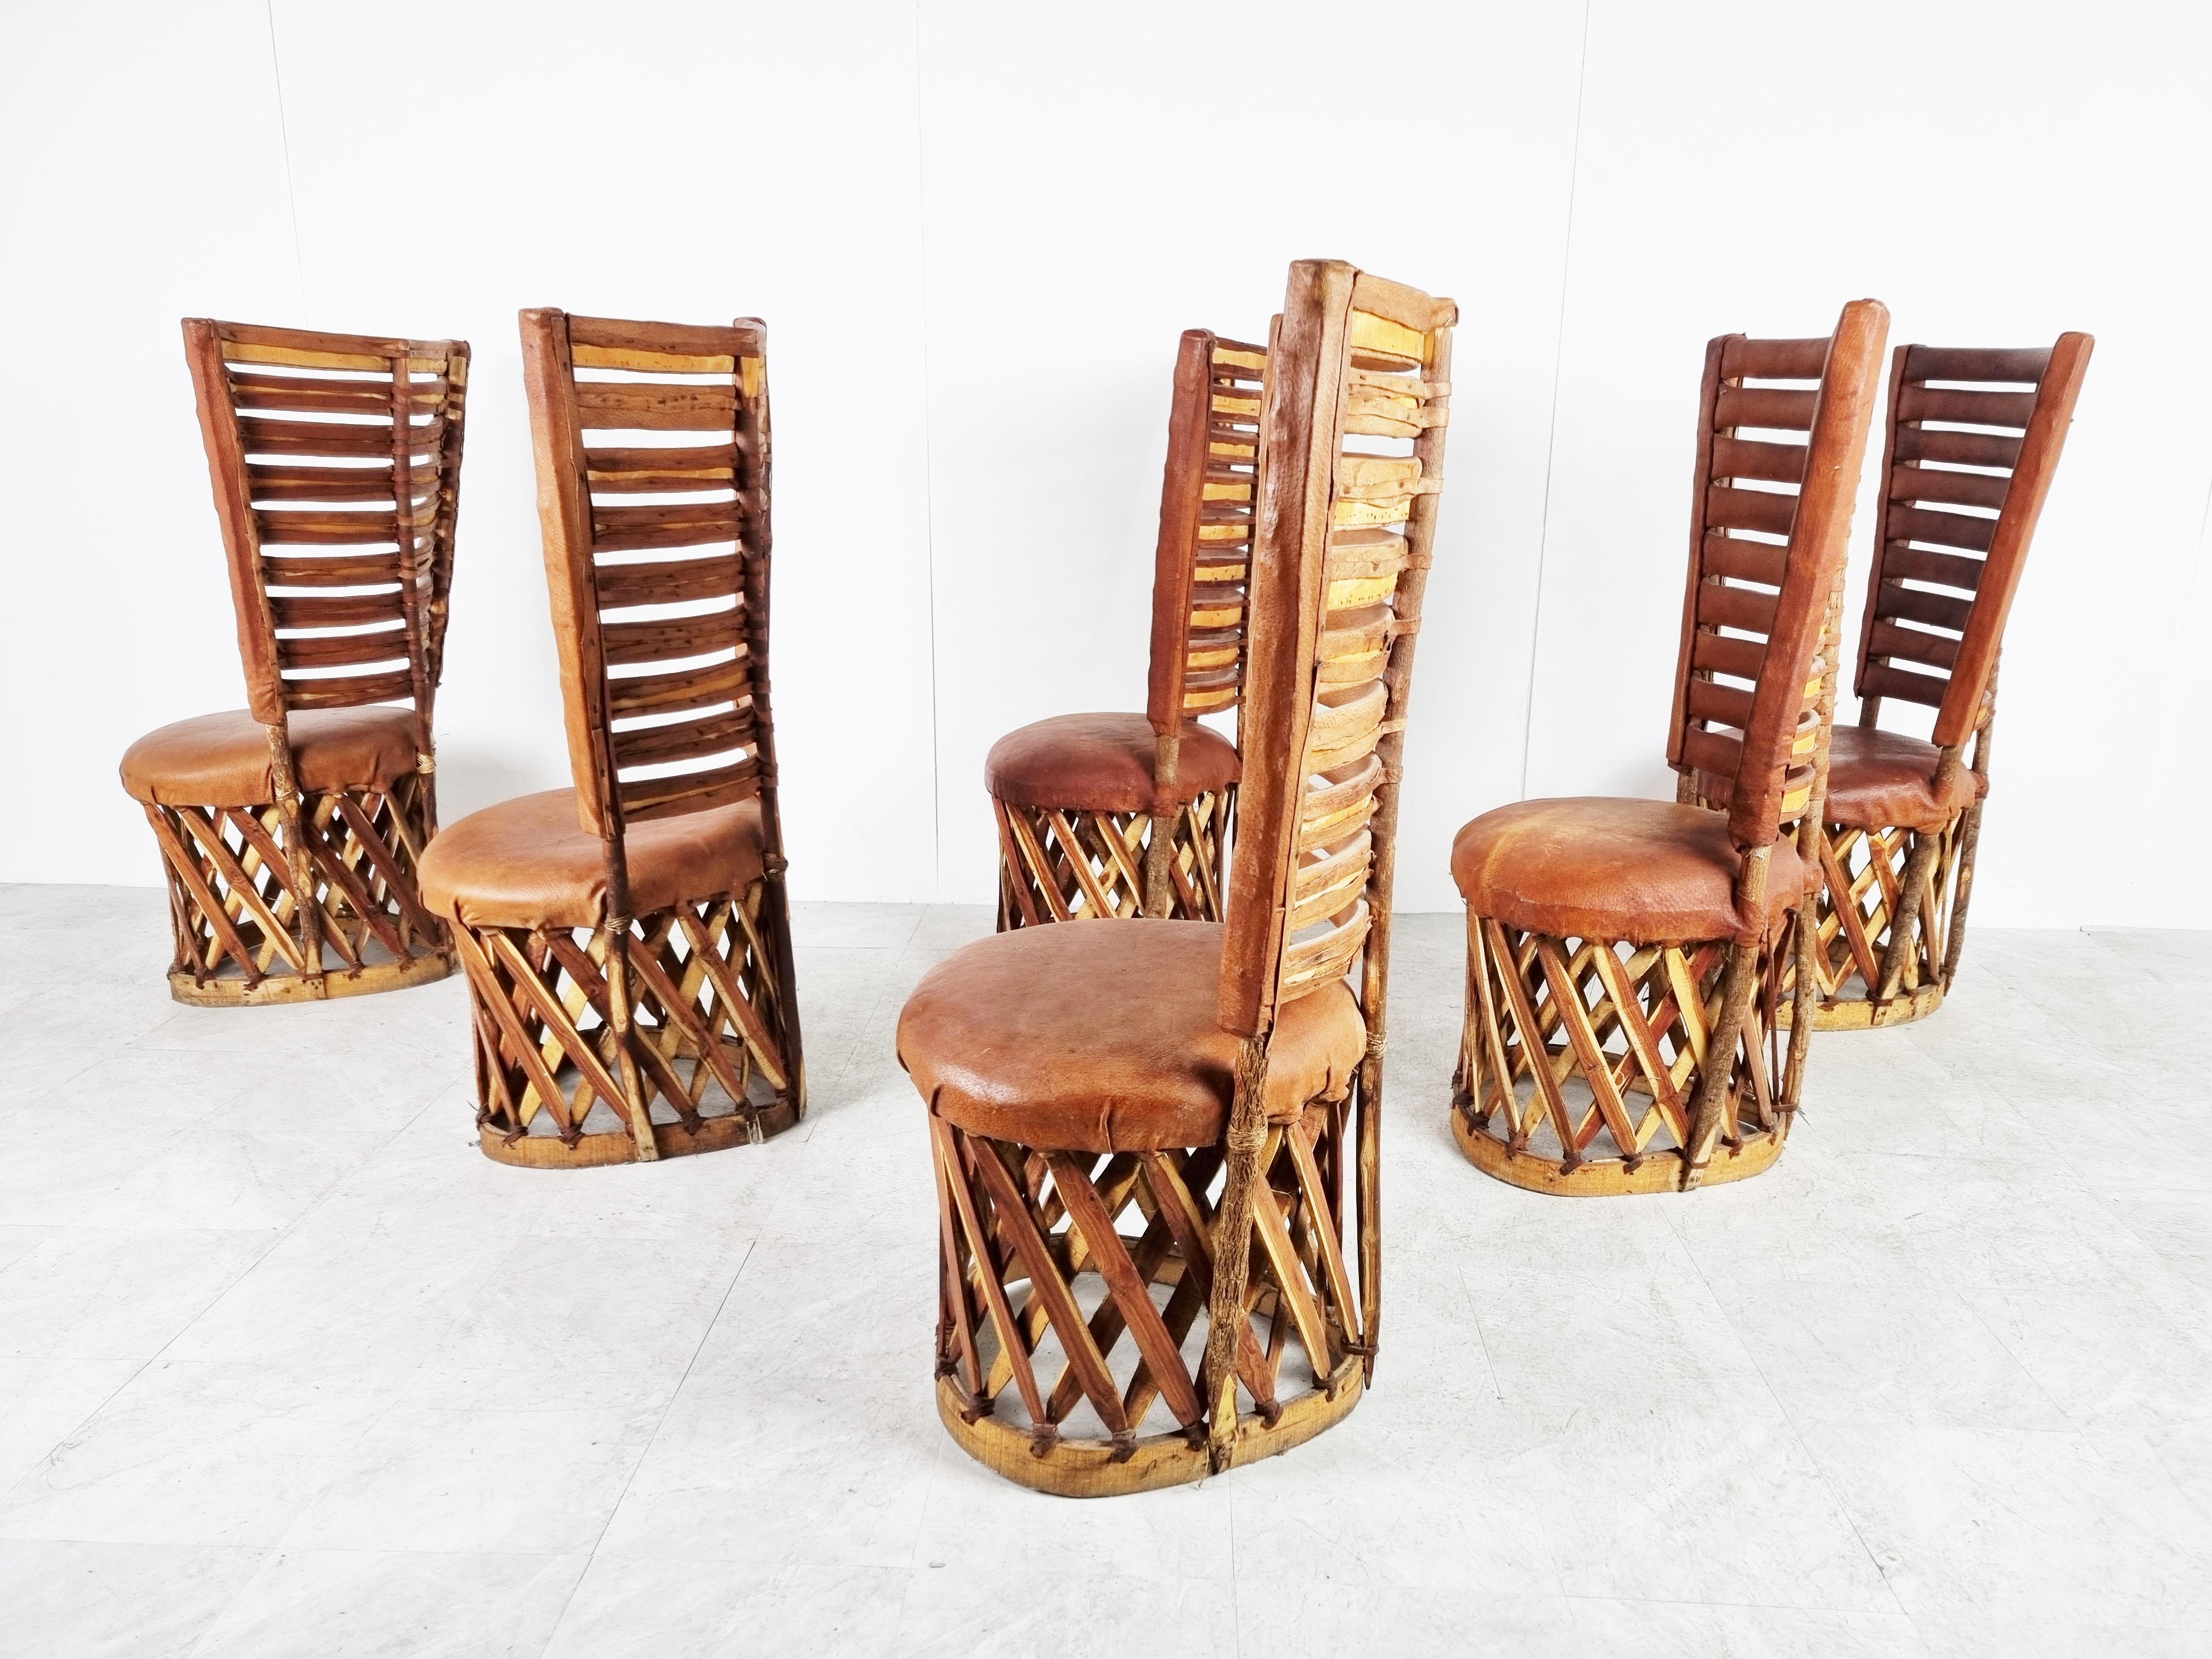 Remarkable high back art populaire or 'equipale' dining chairs from mexico.

Exotic weaved wooden frames upholstered with ostrich leather. The backrests are also upholstered creating a unique look and adding comfort.

1970s - Mexico

Good